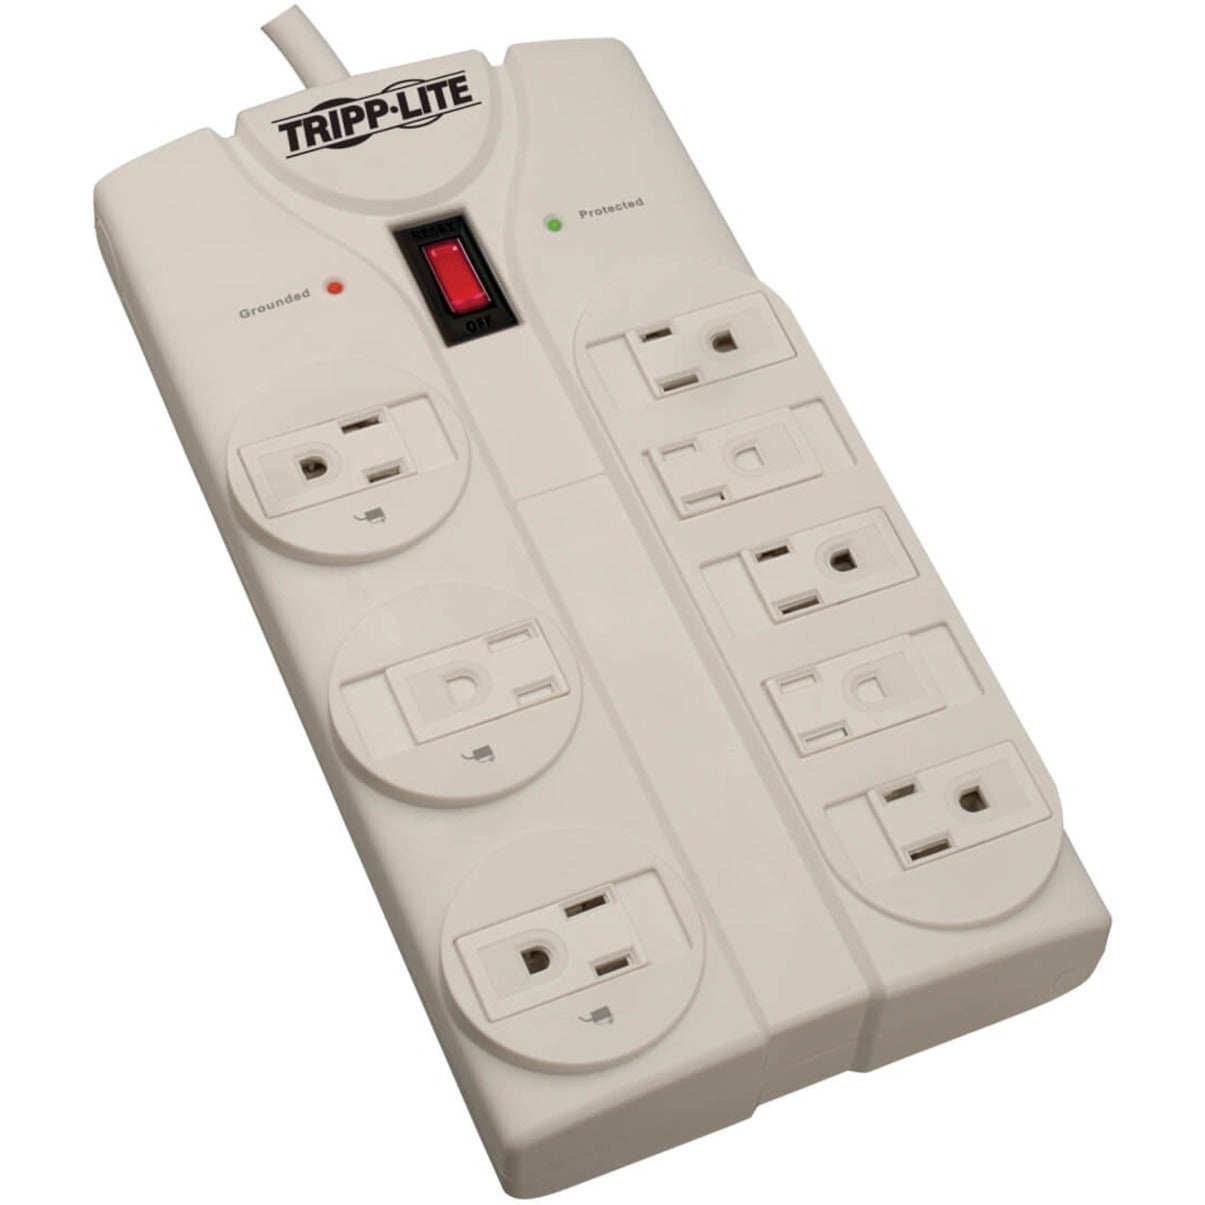 Tripp Lite TLP825 Protect It! 8-Outlet Surge Suppressor, 25' Cord, Light Gray